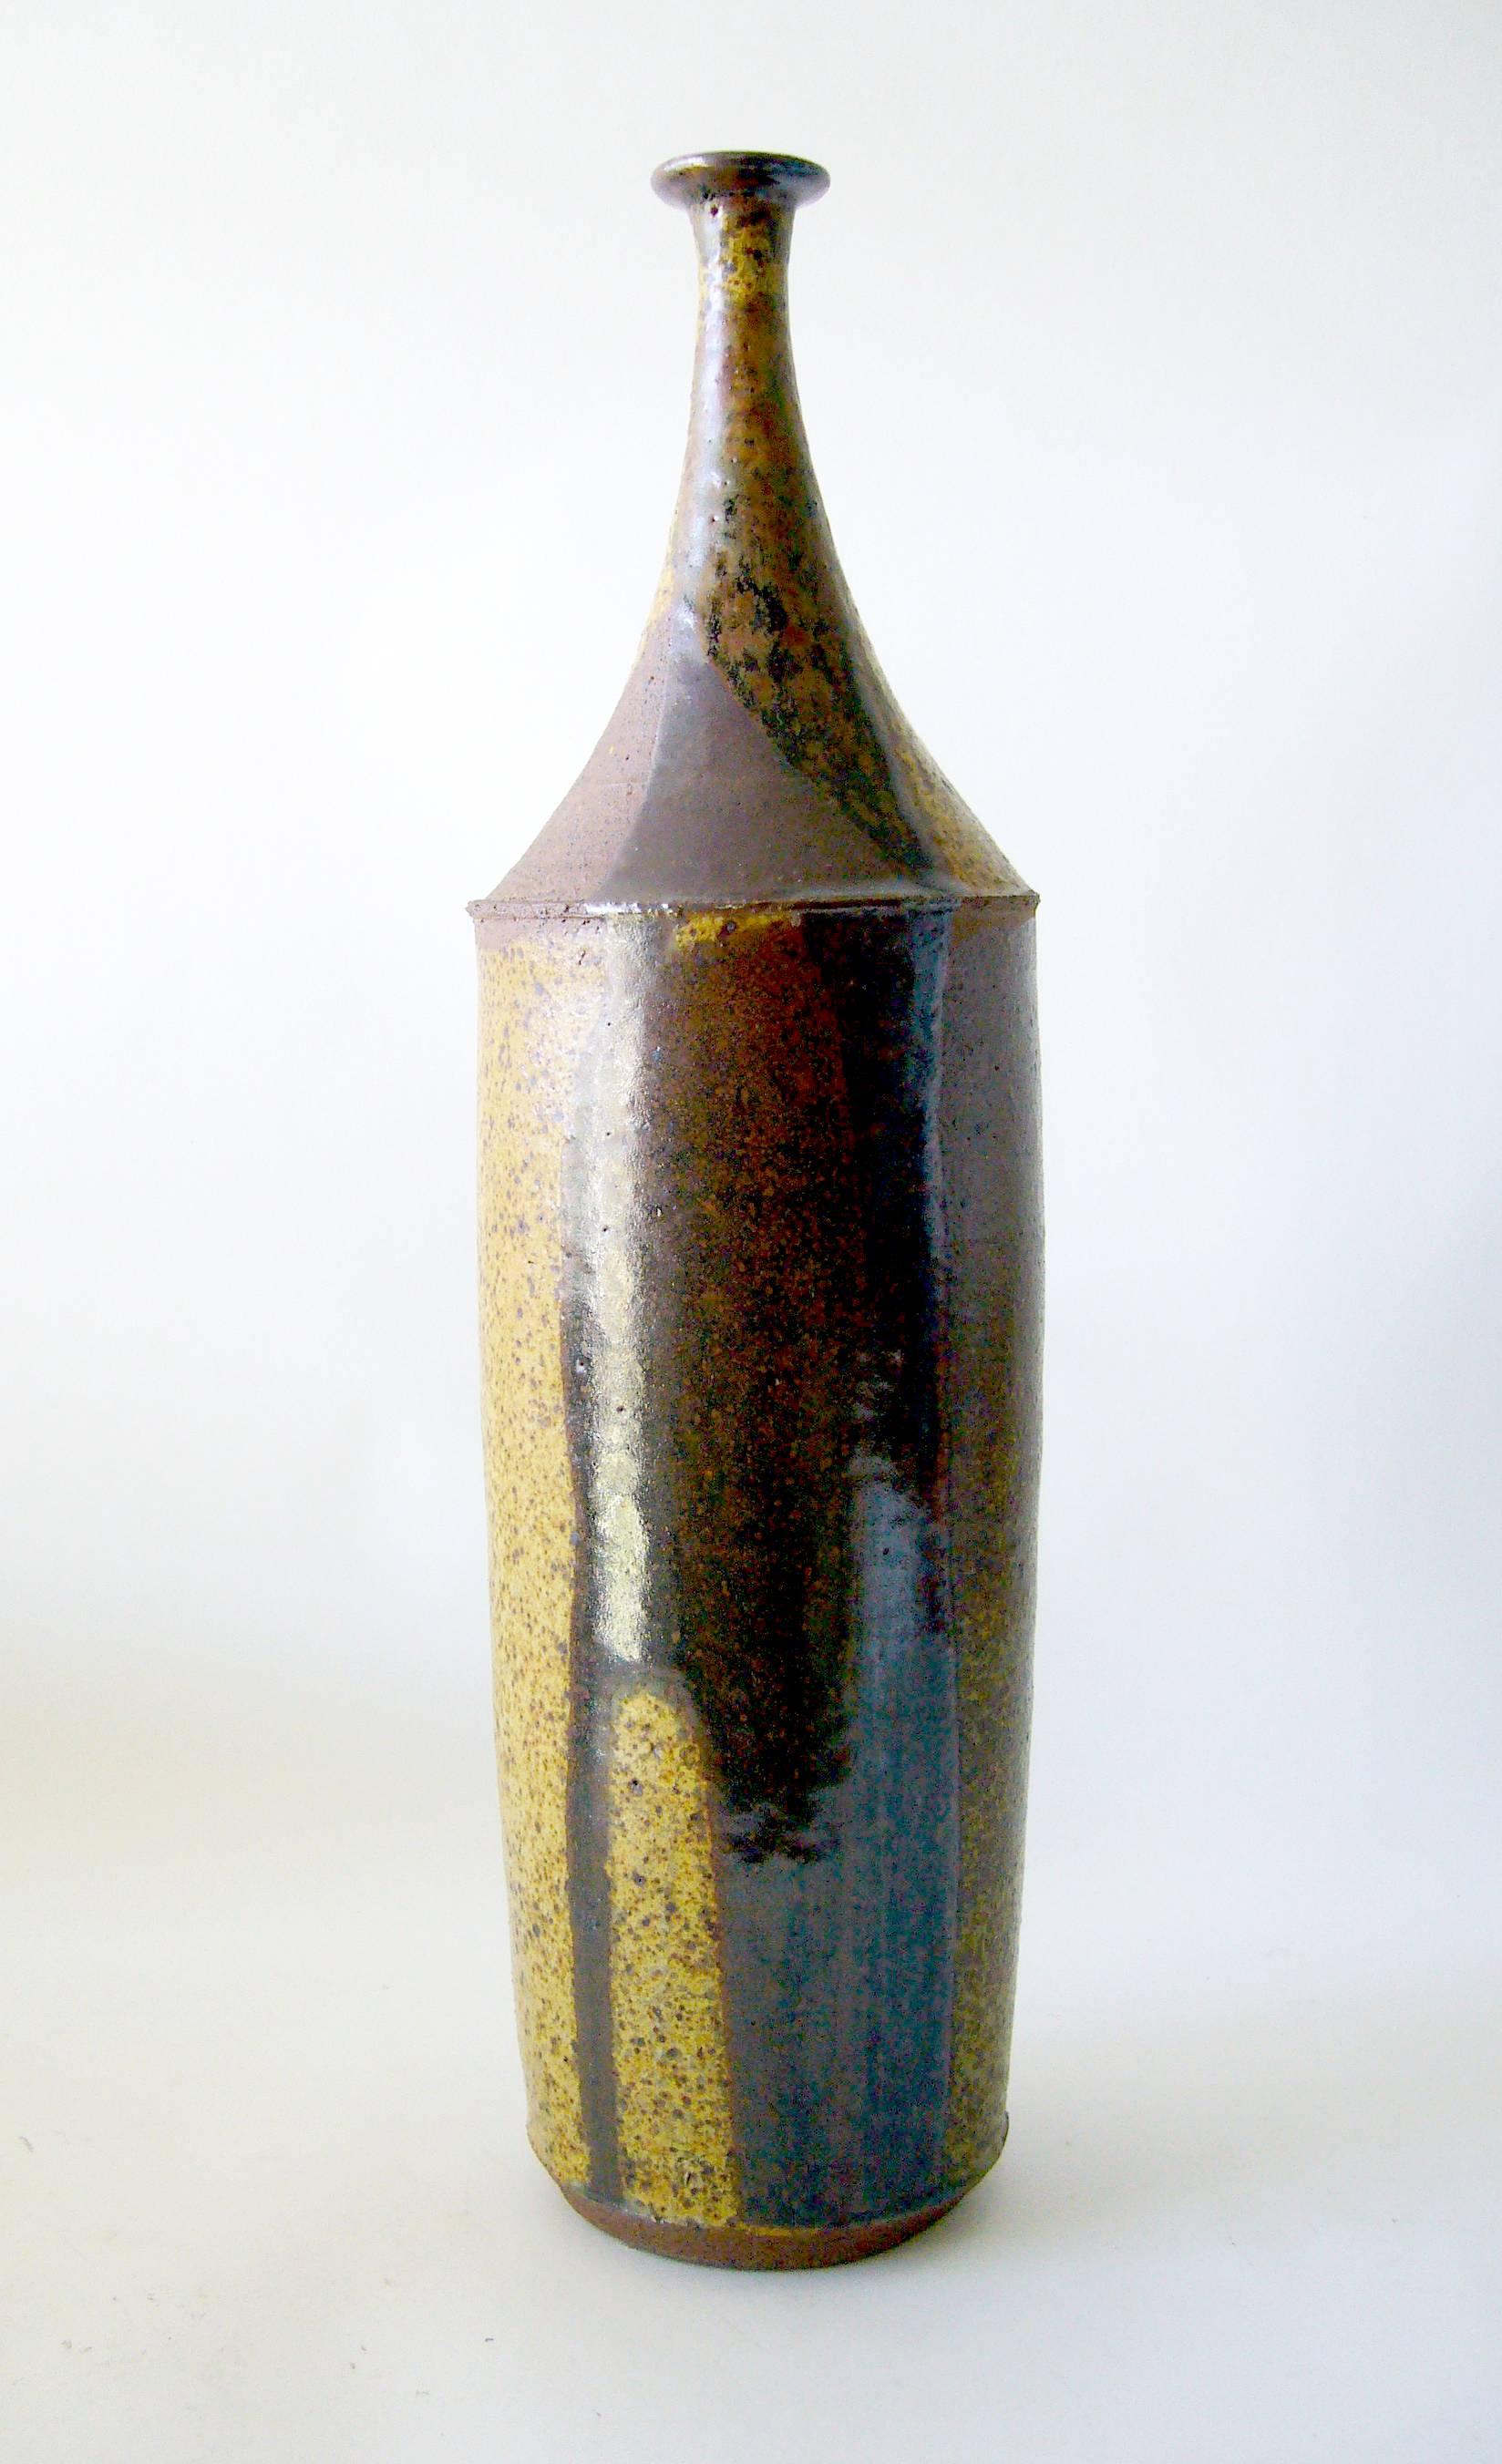 Stoneware bottle vase with drippy glaze created by William Creitz of California. Large in scale, the piece measures 17